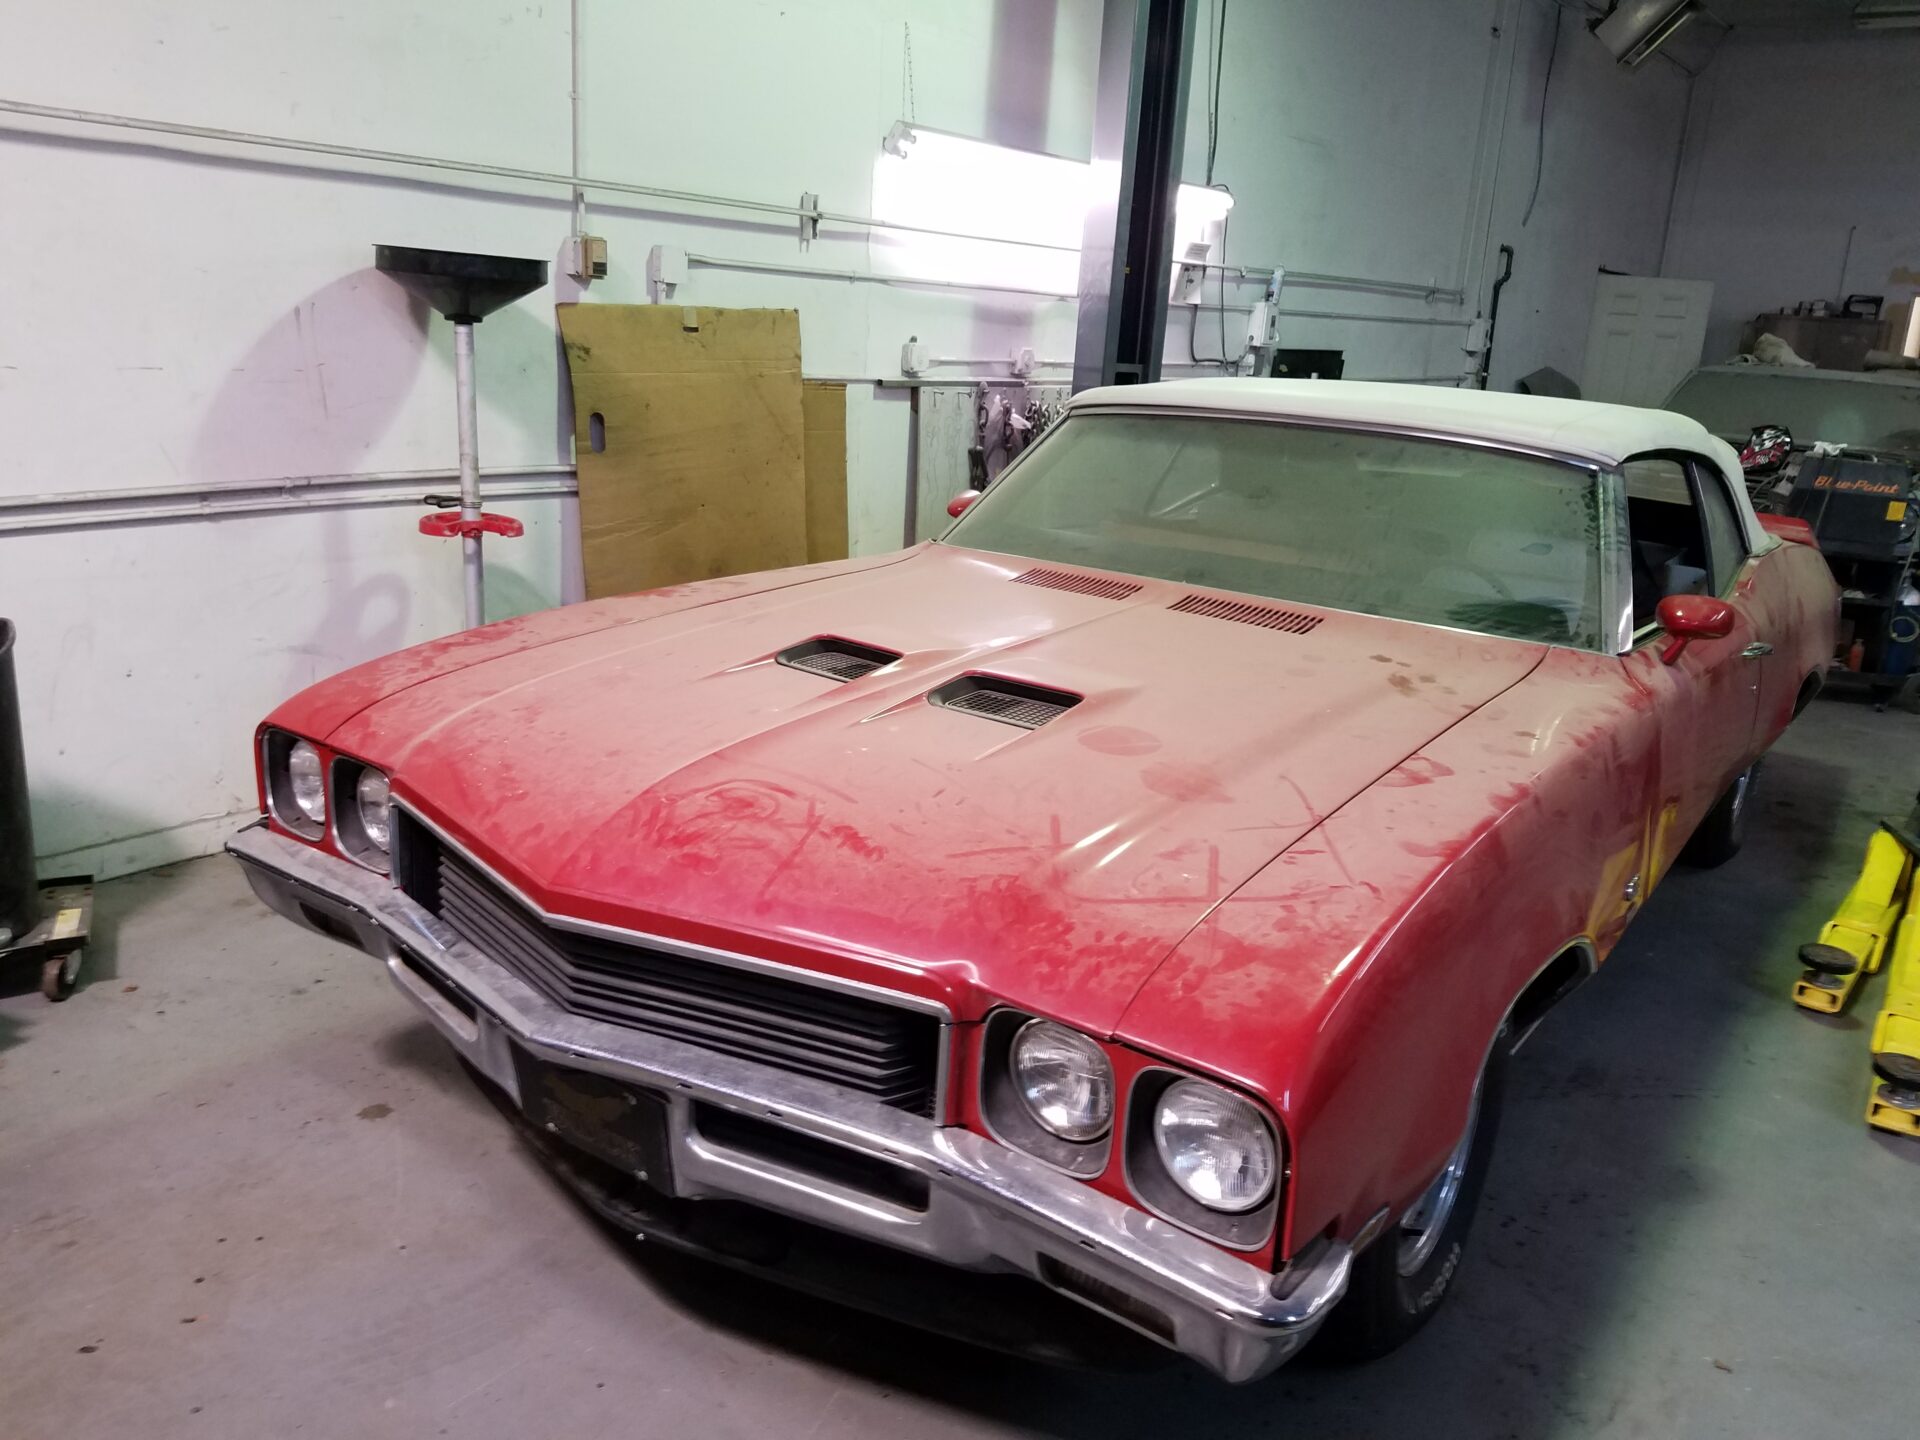 A dusty 1972 Buick GS Convertible